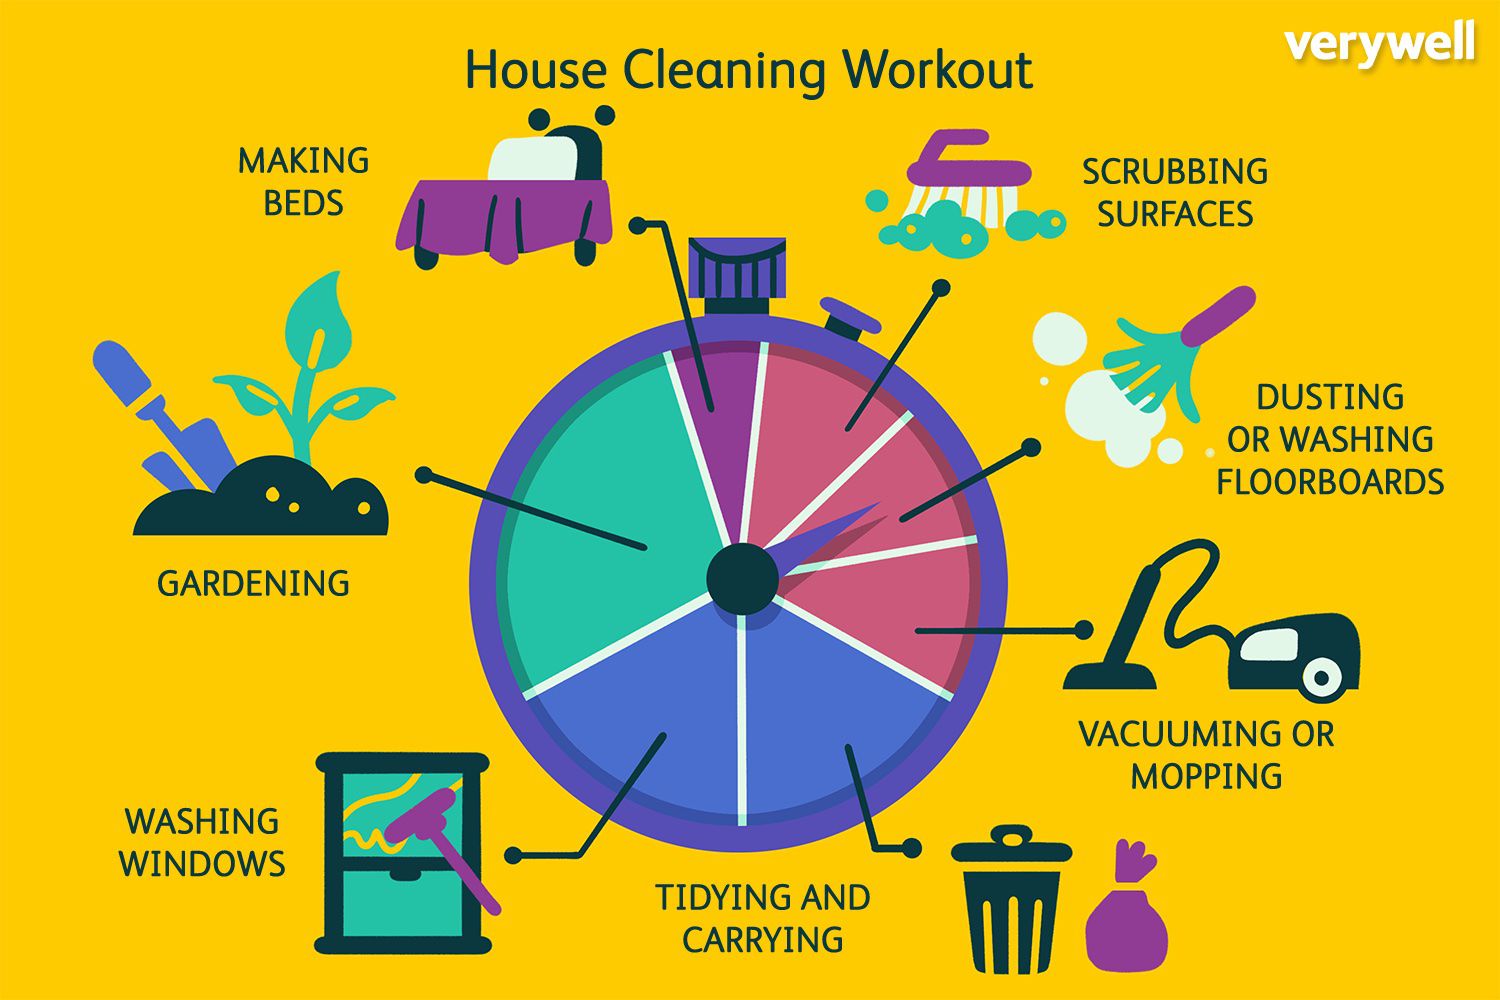 House Cleaning Workout - Illustration by Theresa Chiechi